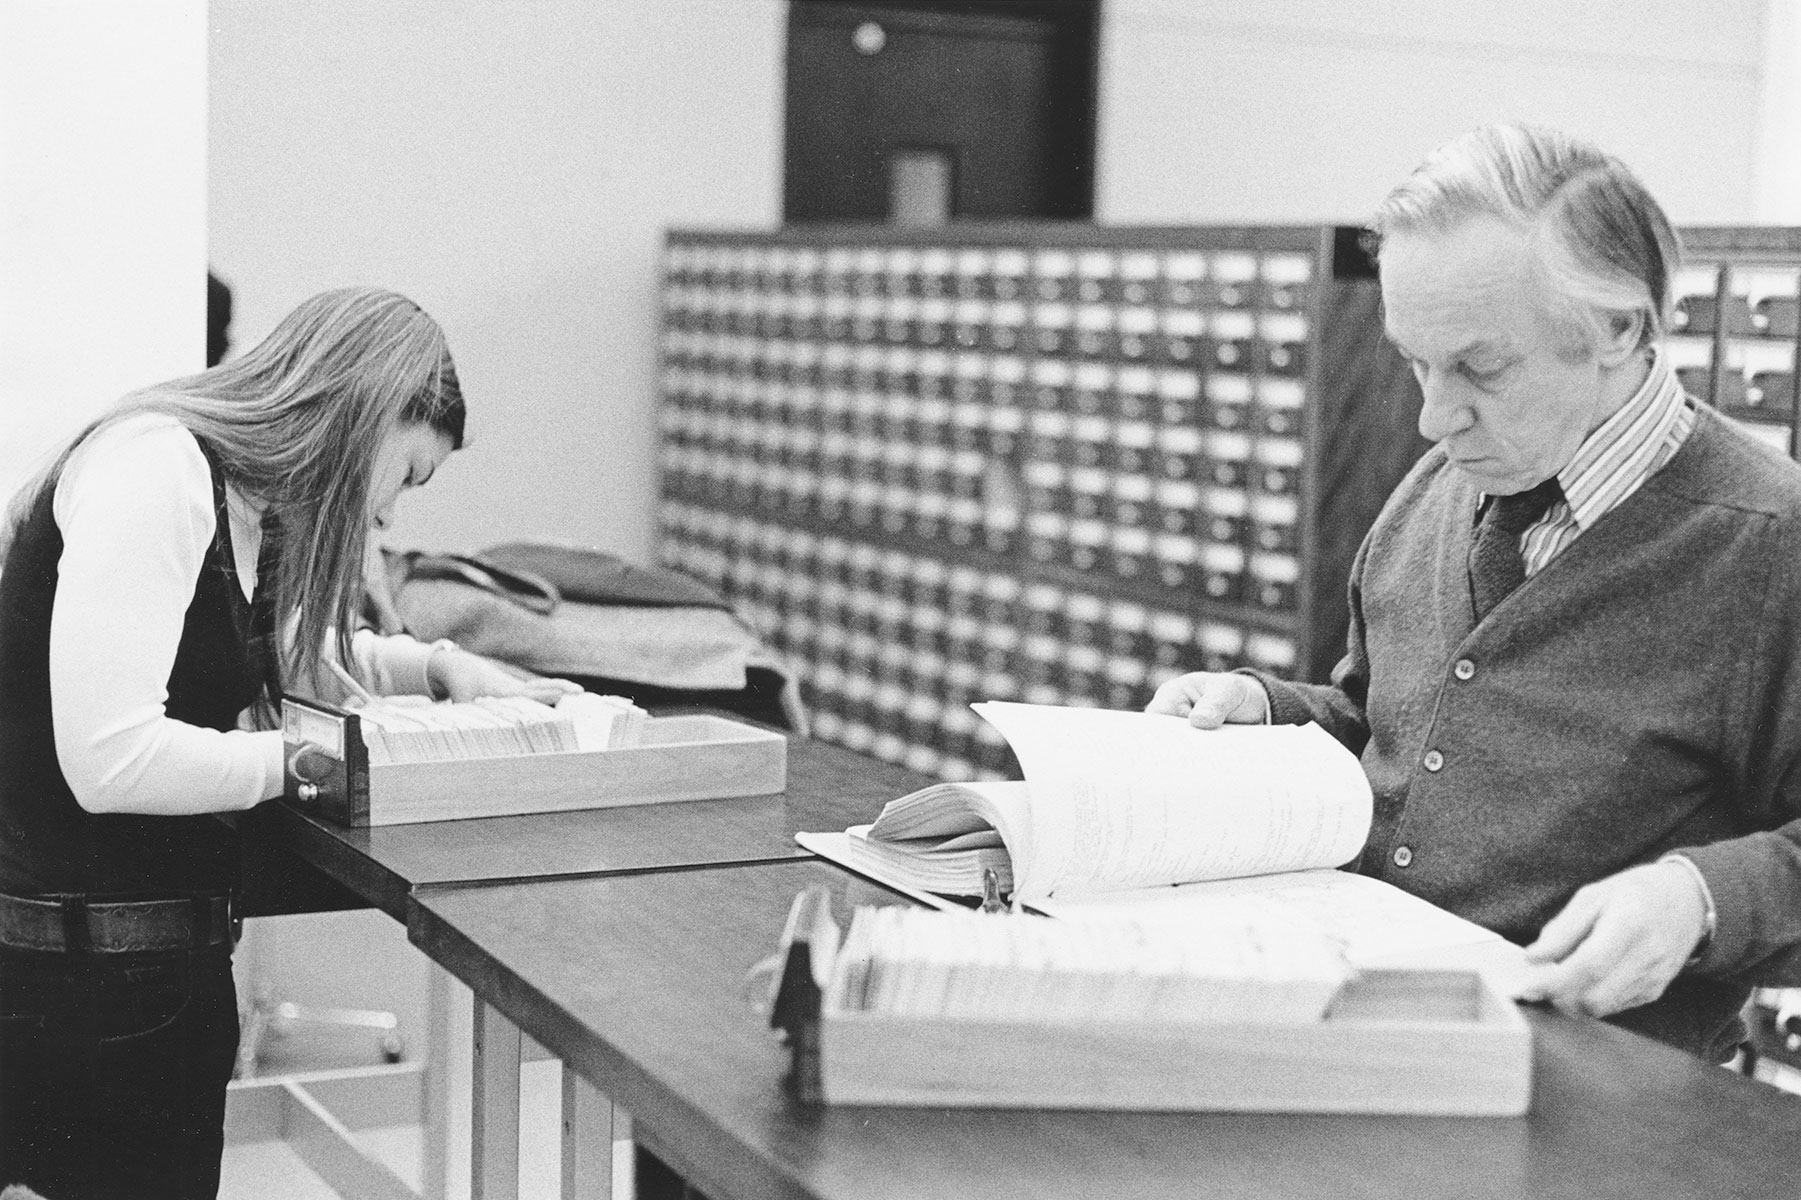 Researchers at the card catalog, circa 1970